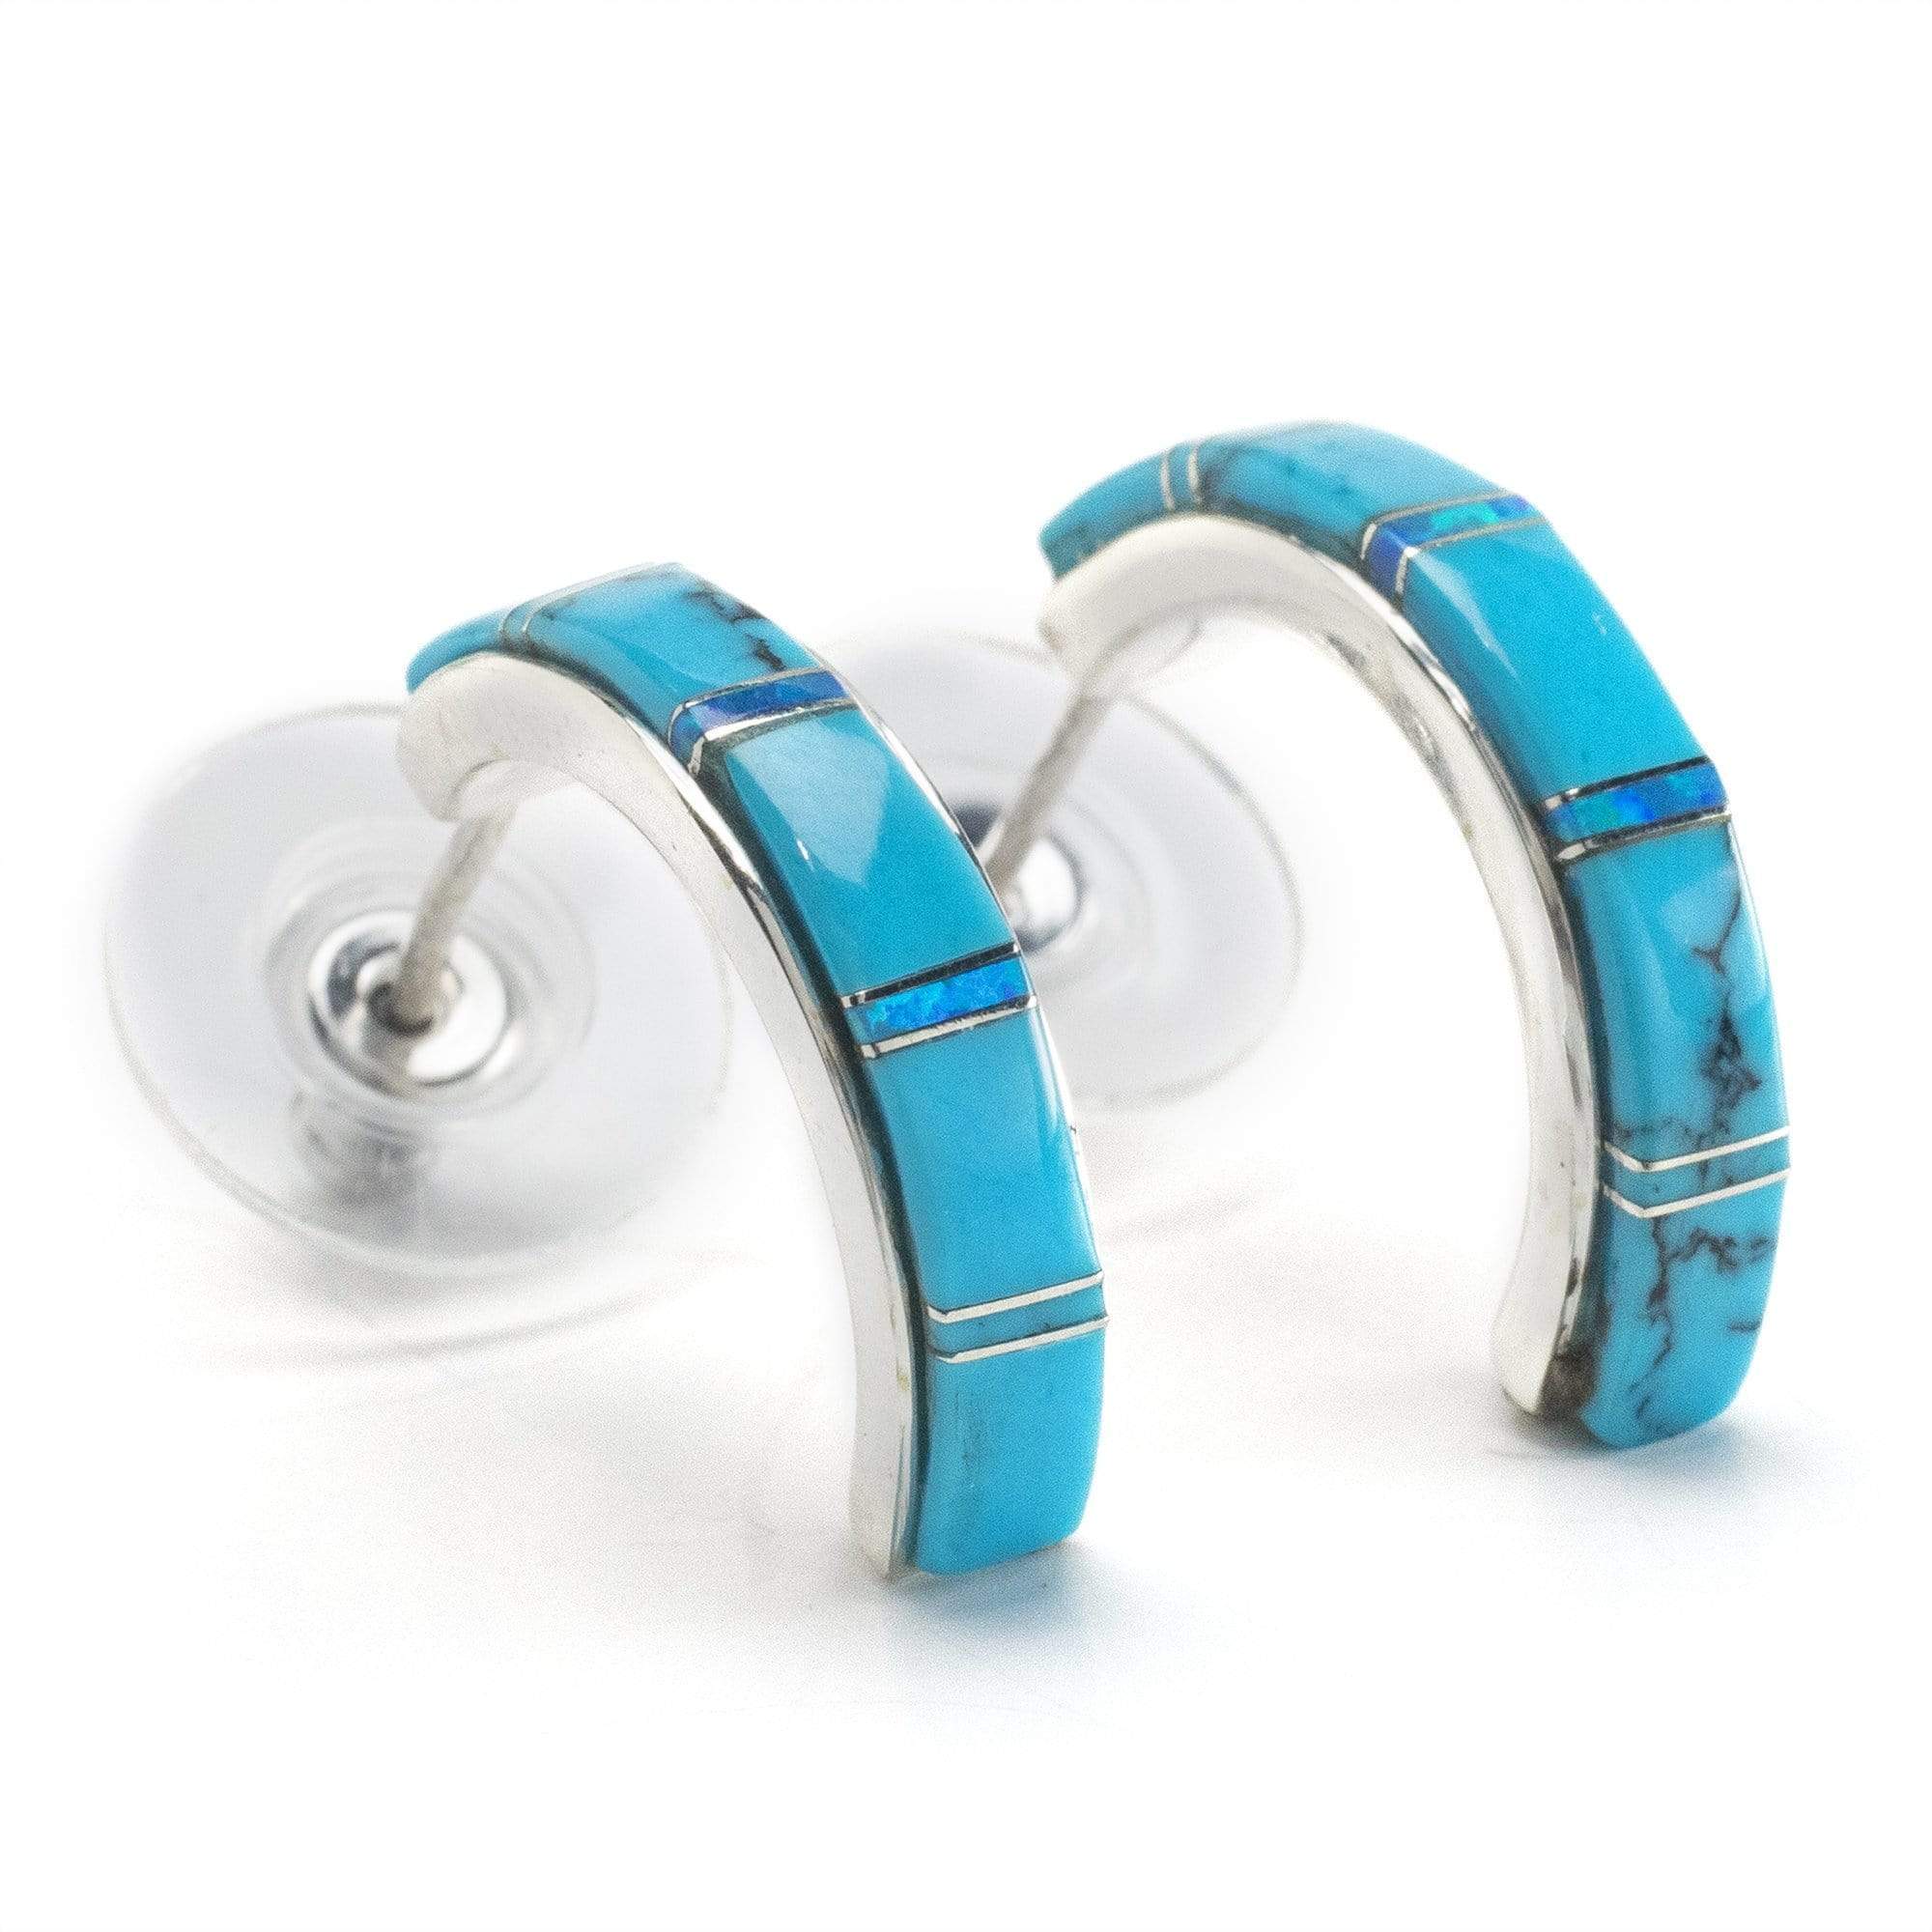 Kalifano Southwest Silver Jewelry Turquoise Semi Hoop 925 Sterling Silver Earring USA Handmade with Opal Accent NME.0406.TQ